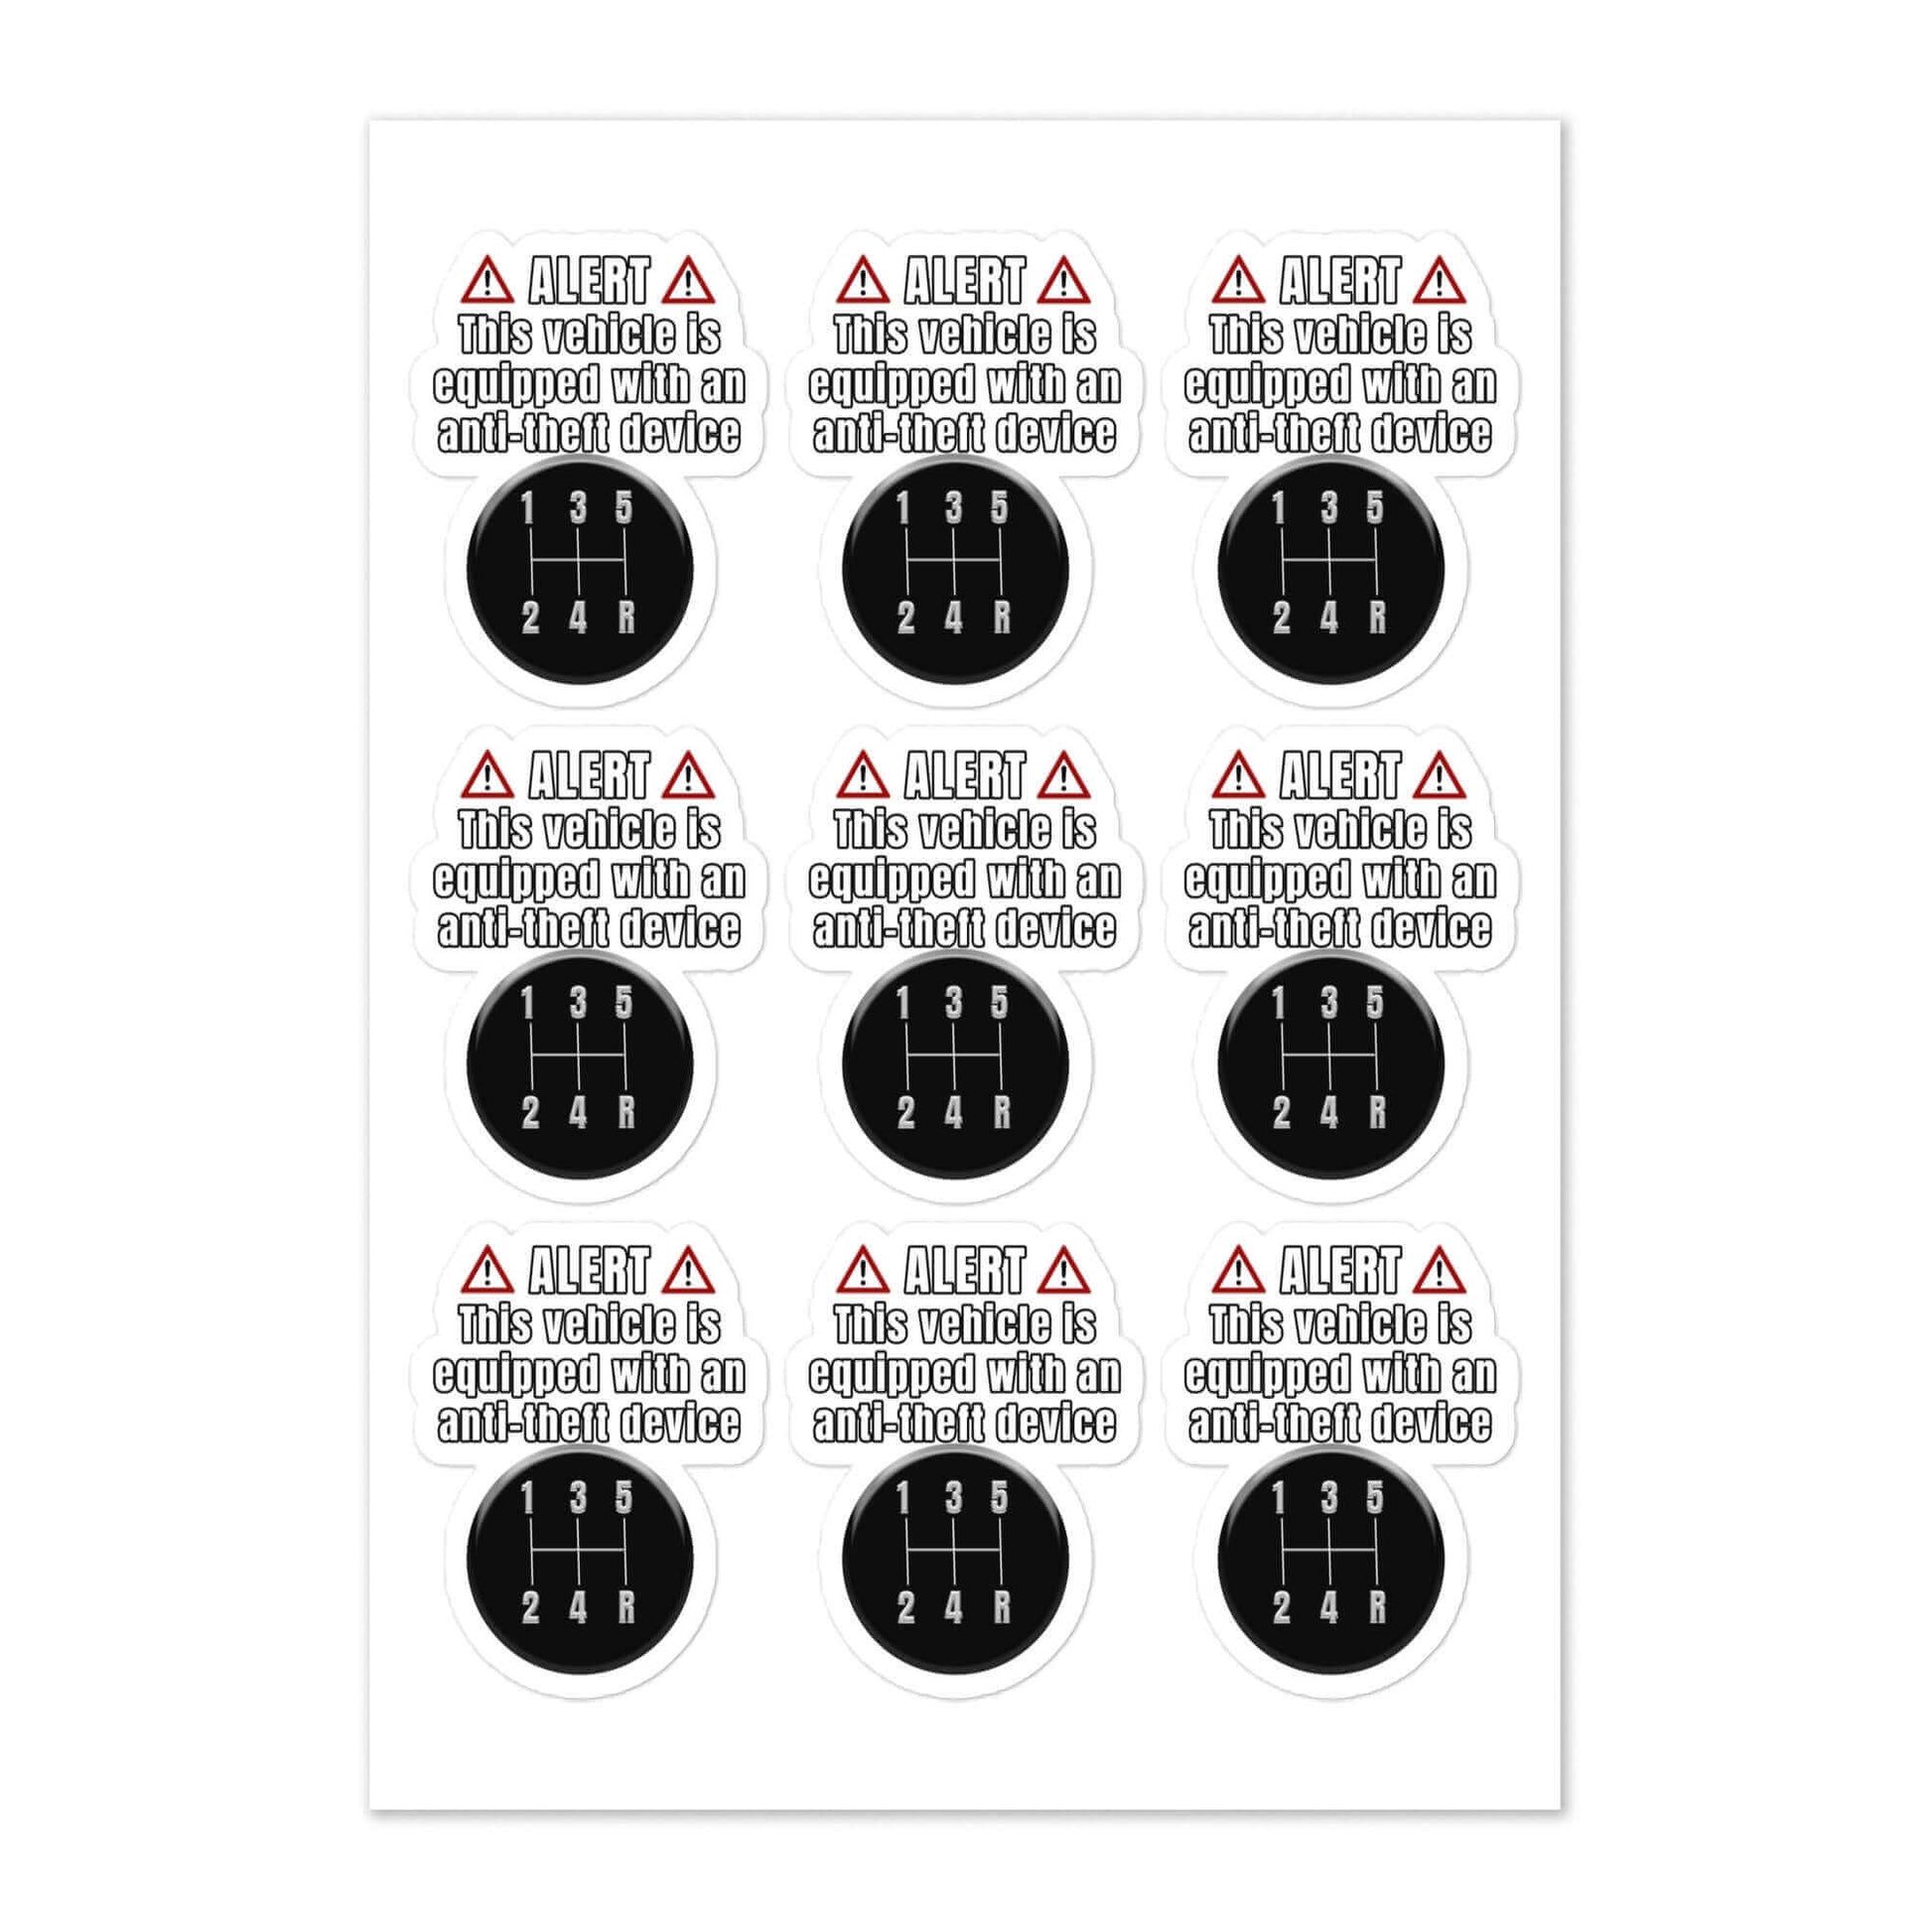 Alert - This vehicle is equipped with an anti-theft device - Sticker sheet anti-theft Auto THeft car Car Jacking funny sticker manual Manual Transmission meme sticker Stick Shift sticker vinyl sticker water proof sticker